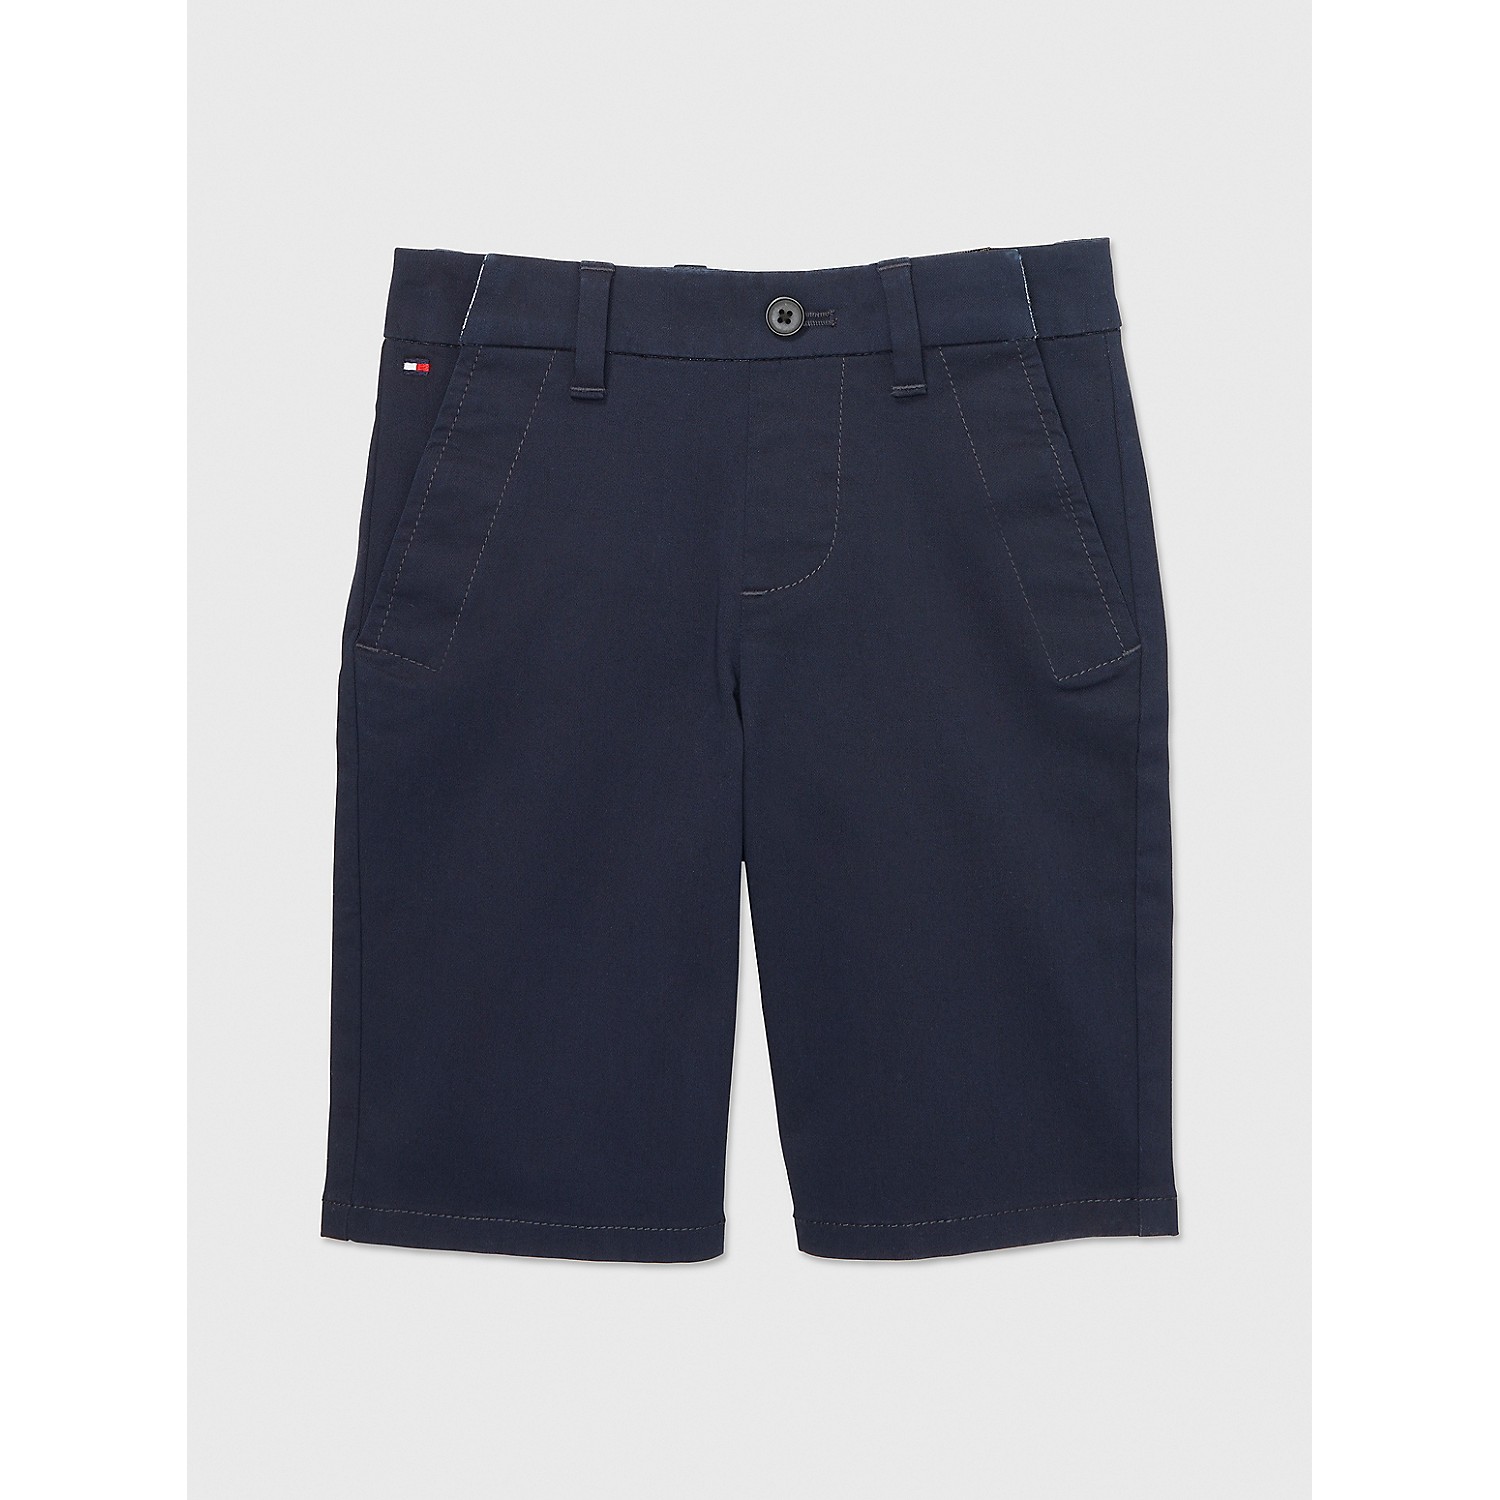 TOMMY HILFIGER Kids Seated Fit Chino Short